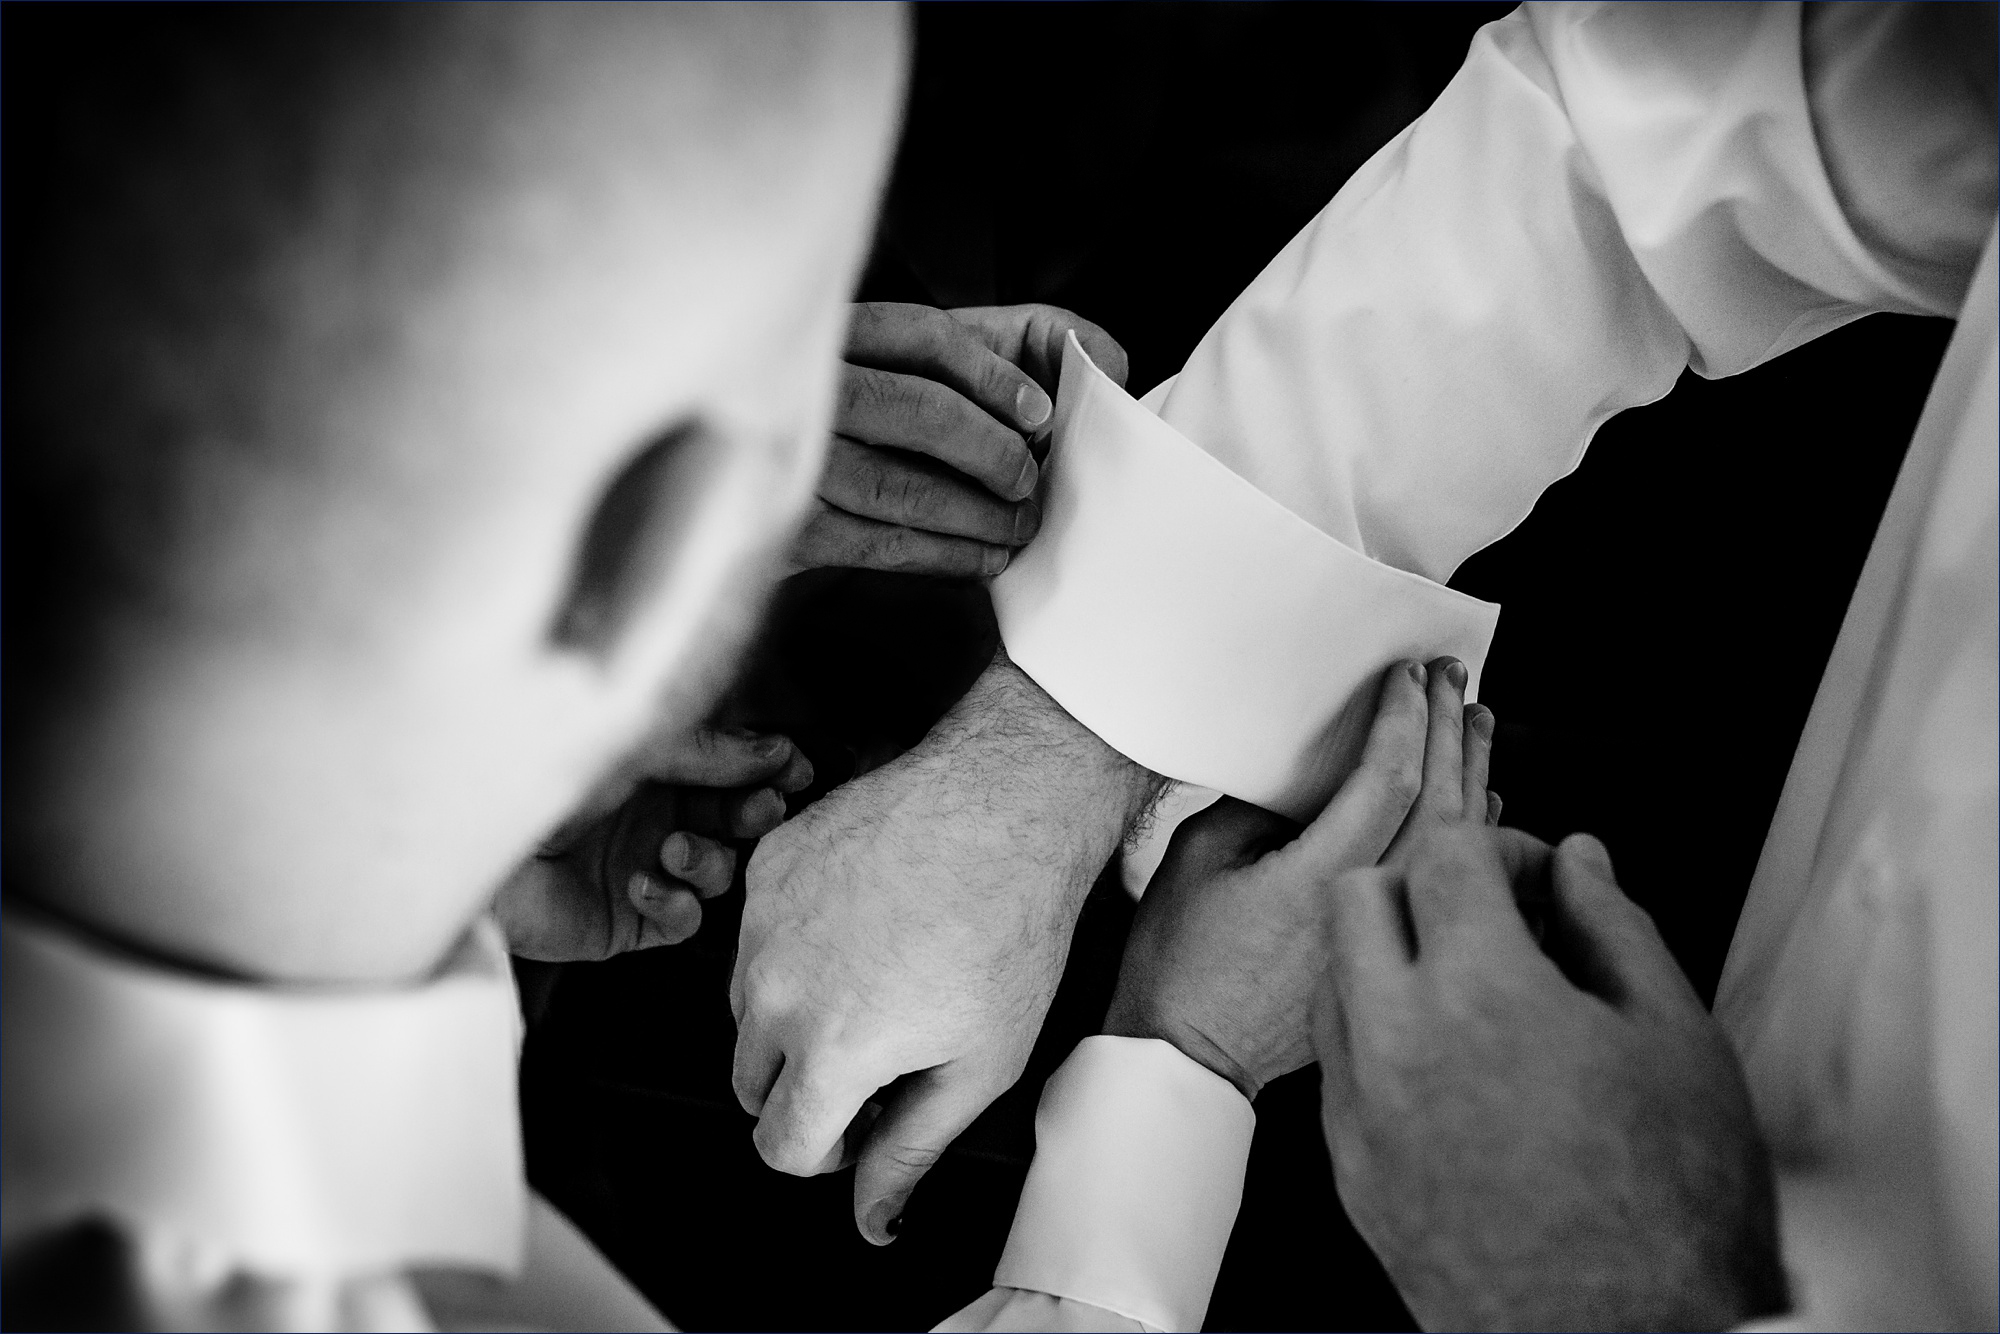 Getting the cufflinks on with groomsmen help on the winter wedding day